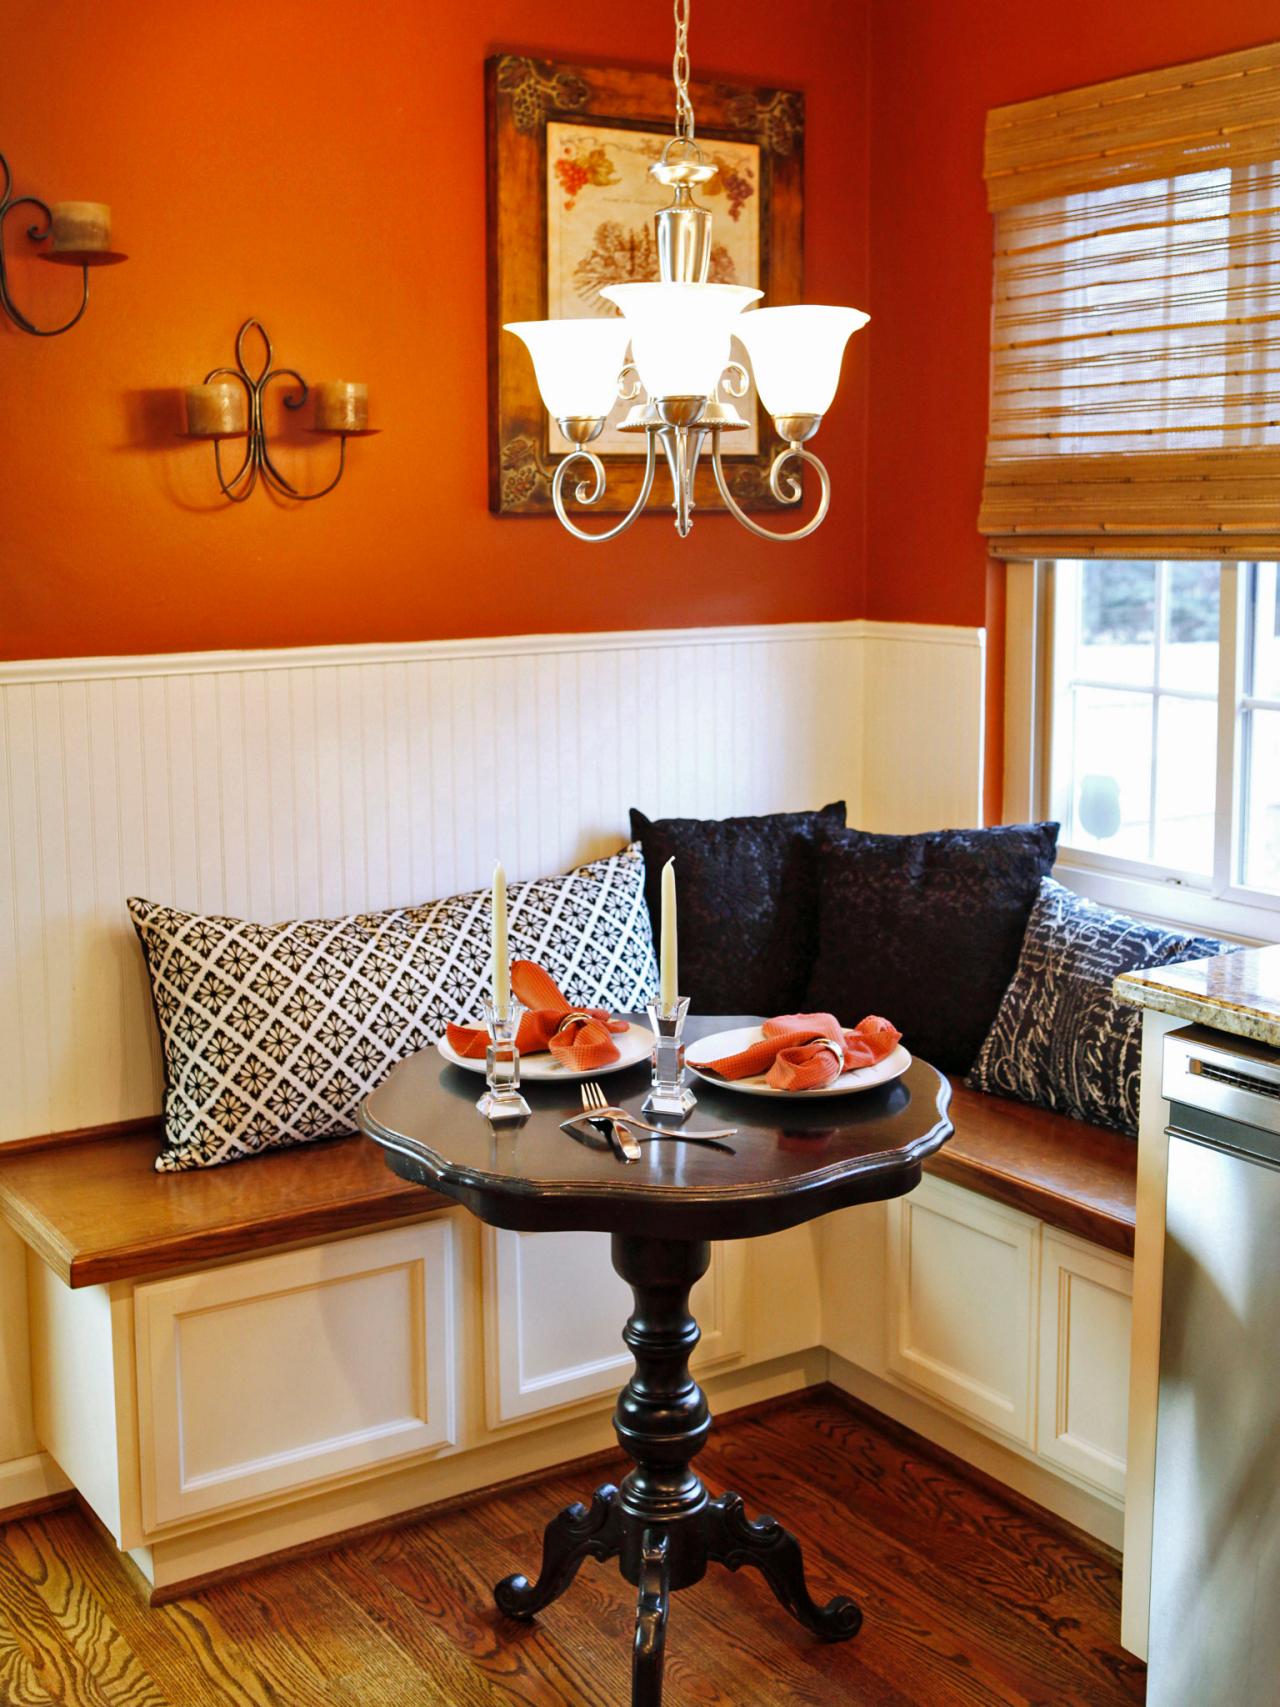 Small Kitchen Table Ideas Pictures & Tips From HGTV   HGTV